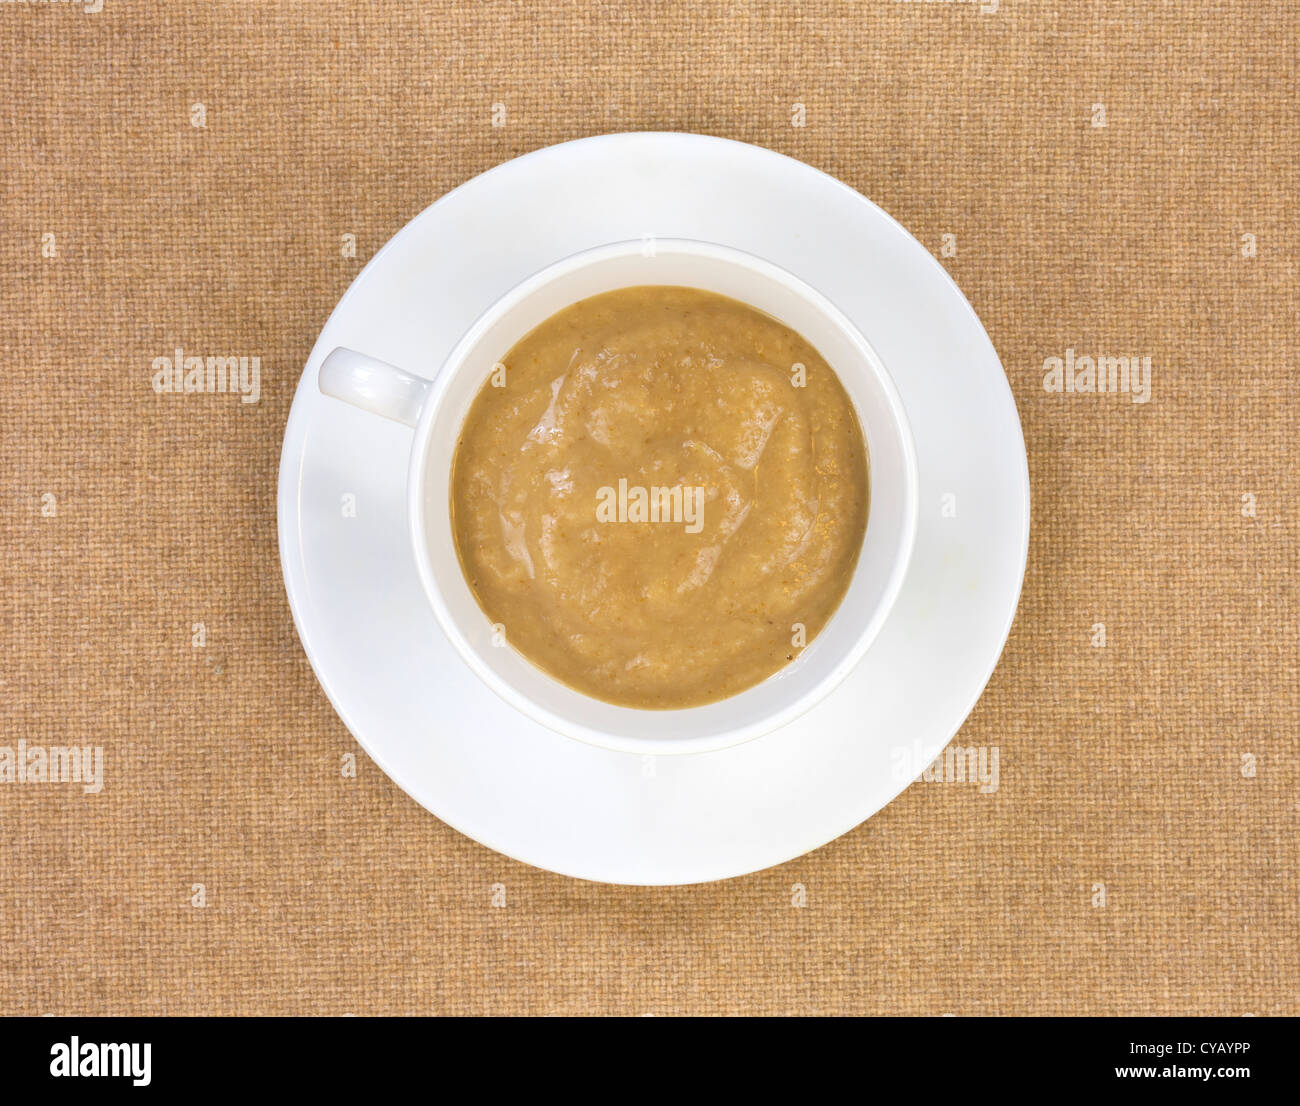 Top view of an antioxidant drink in a white cup and saucer on a tan cloth background. Stock Photo